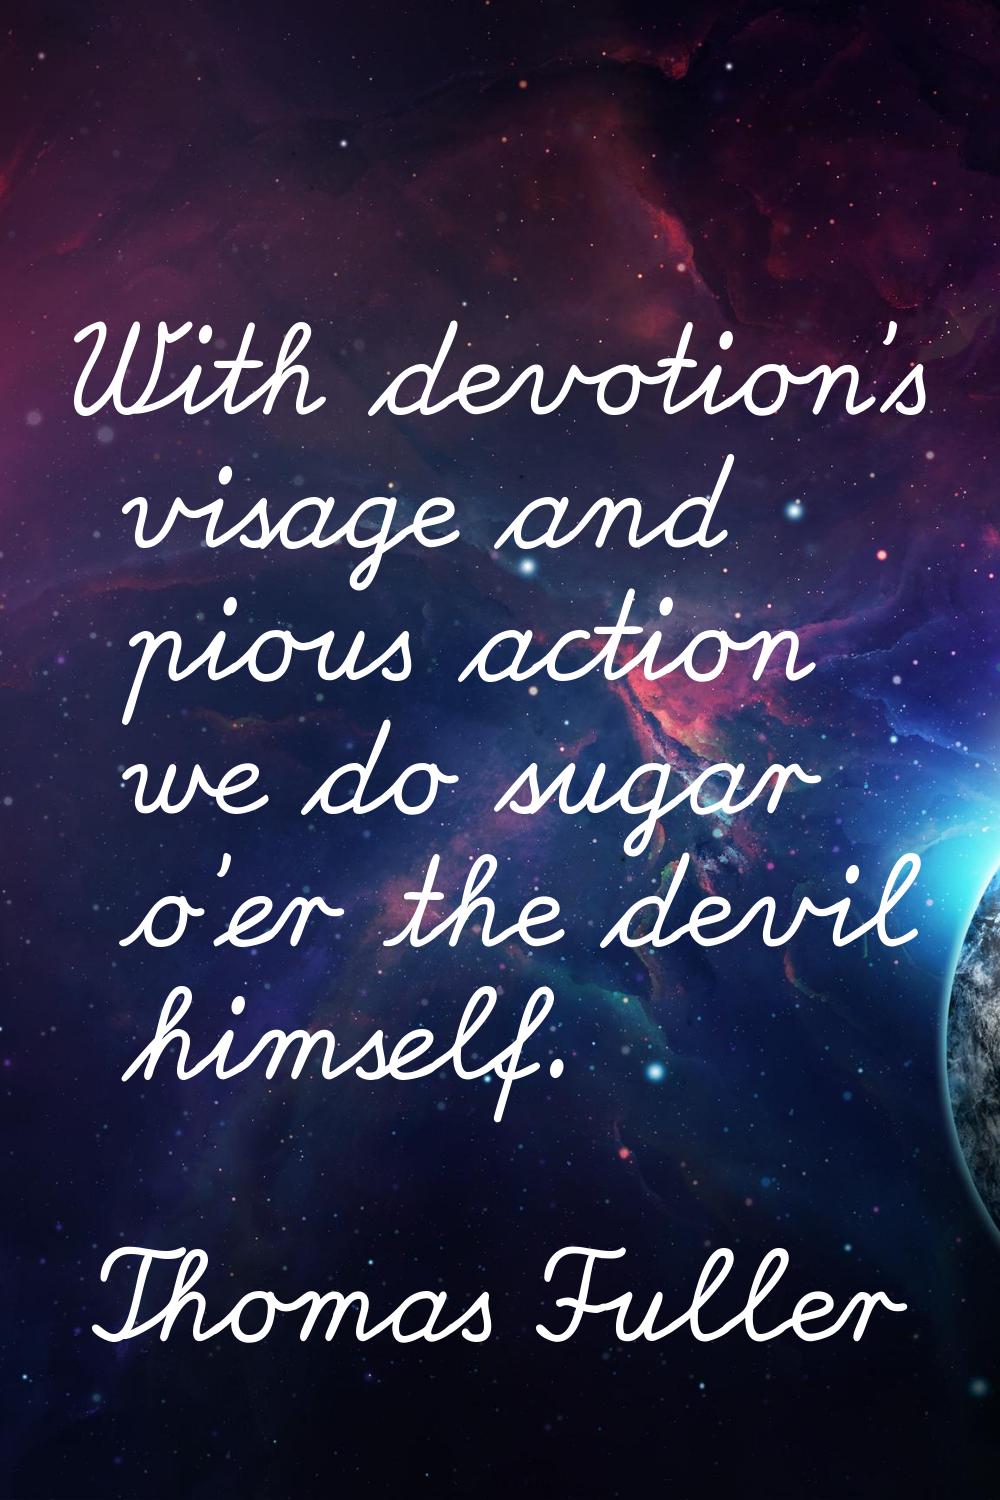 With devotion's visage and pious action we do sugar o'er the devil himself.